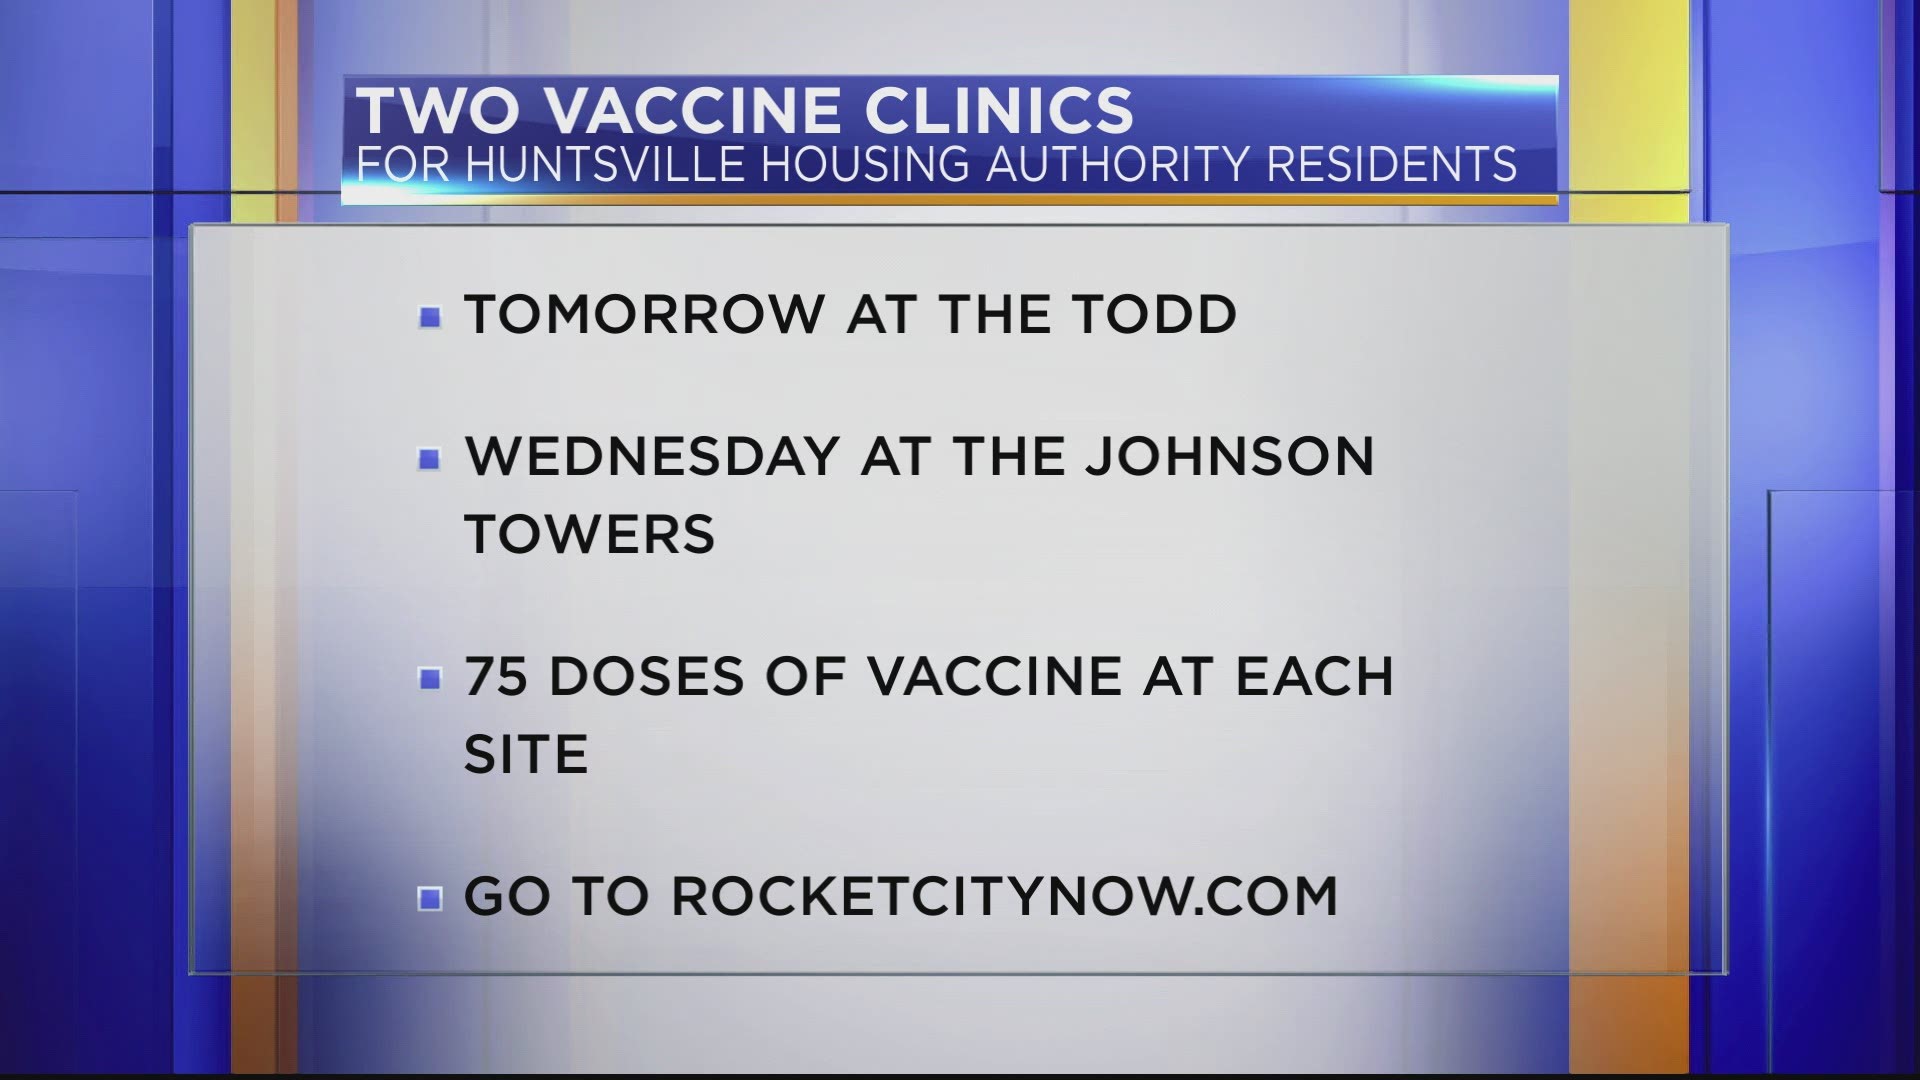 Huntsville Housing Authority has teamed up with Huntsville Hospital to provide COVID vaccines to some residents.